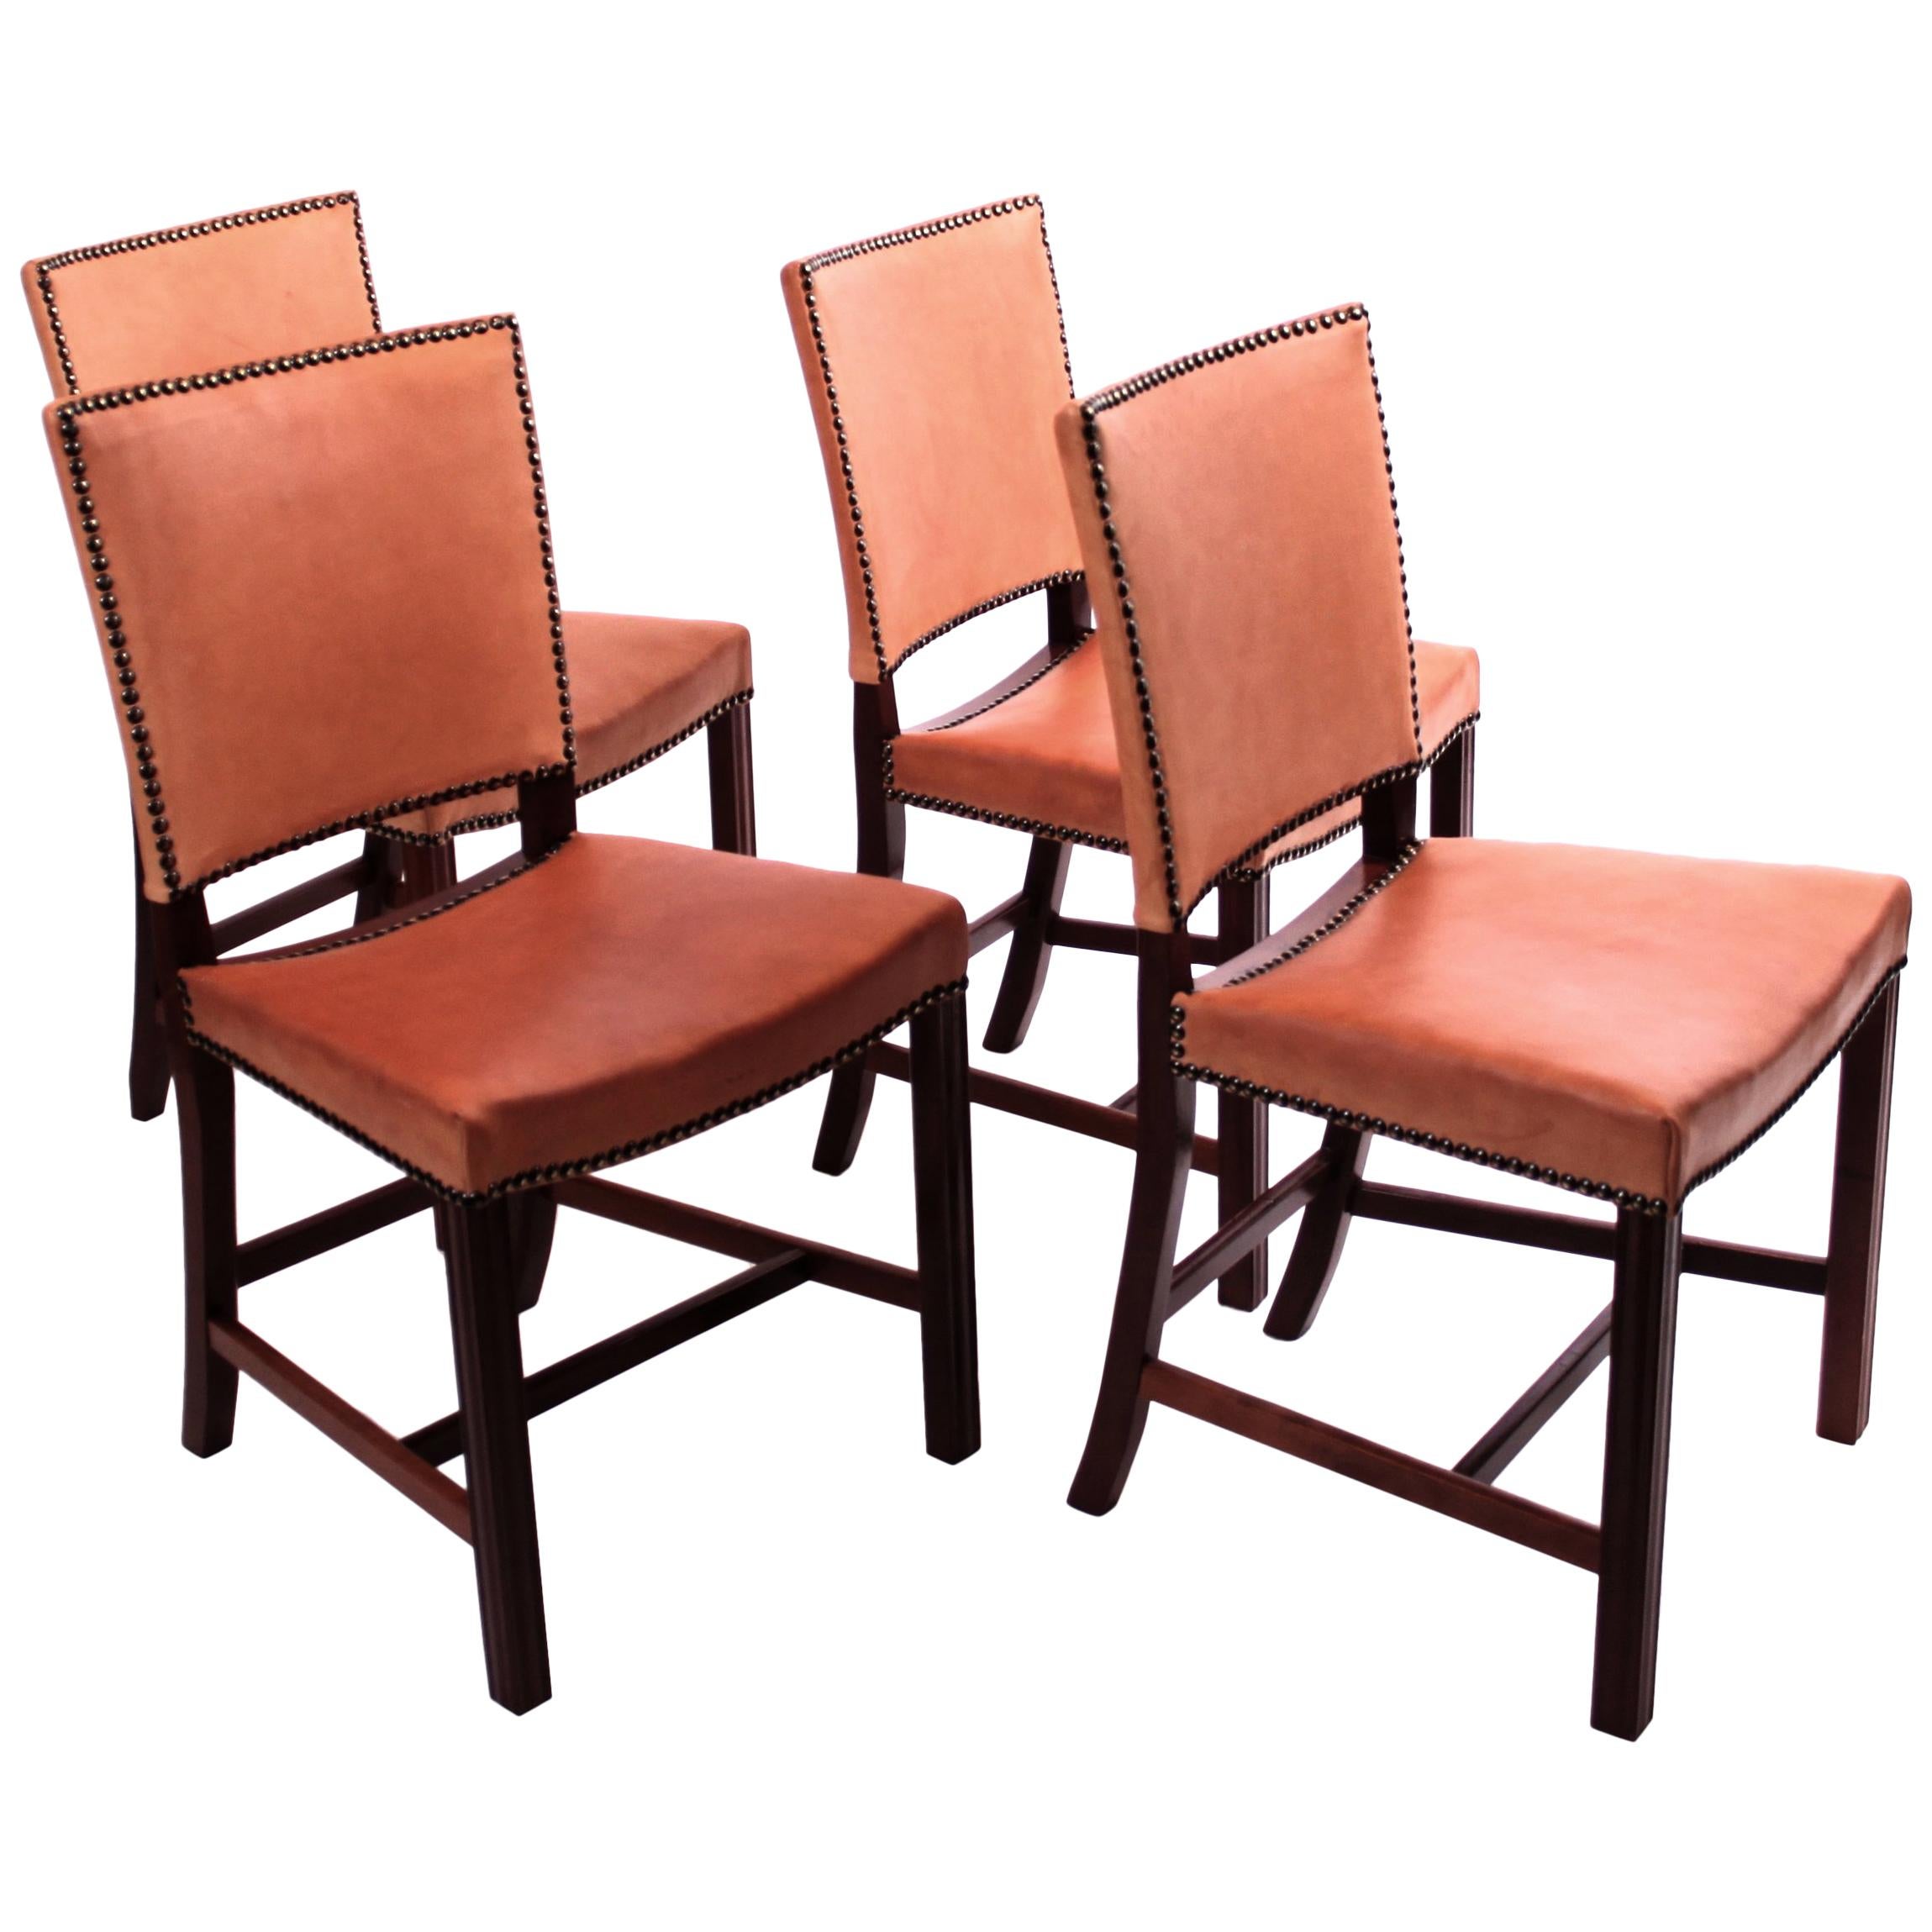 Four Kaare Klint "Red Chairs" / "Barcelona Chairs", Mahogany and Leather